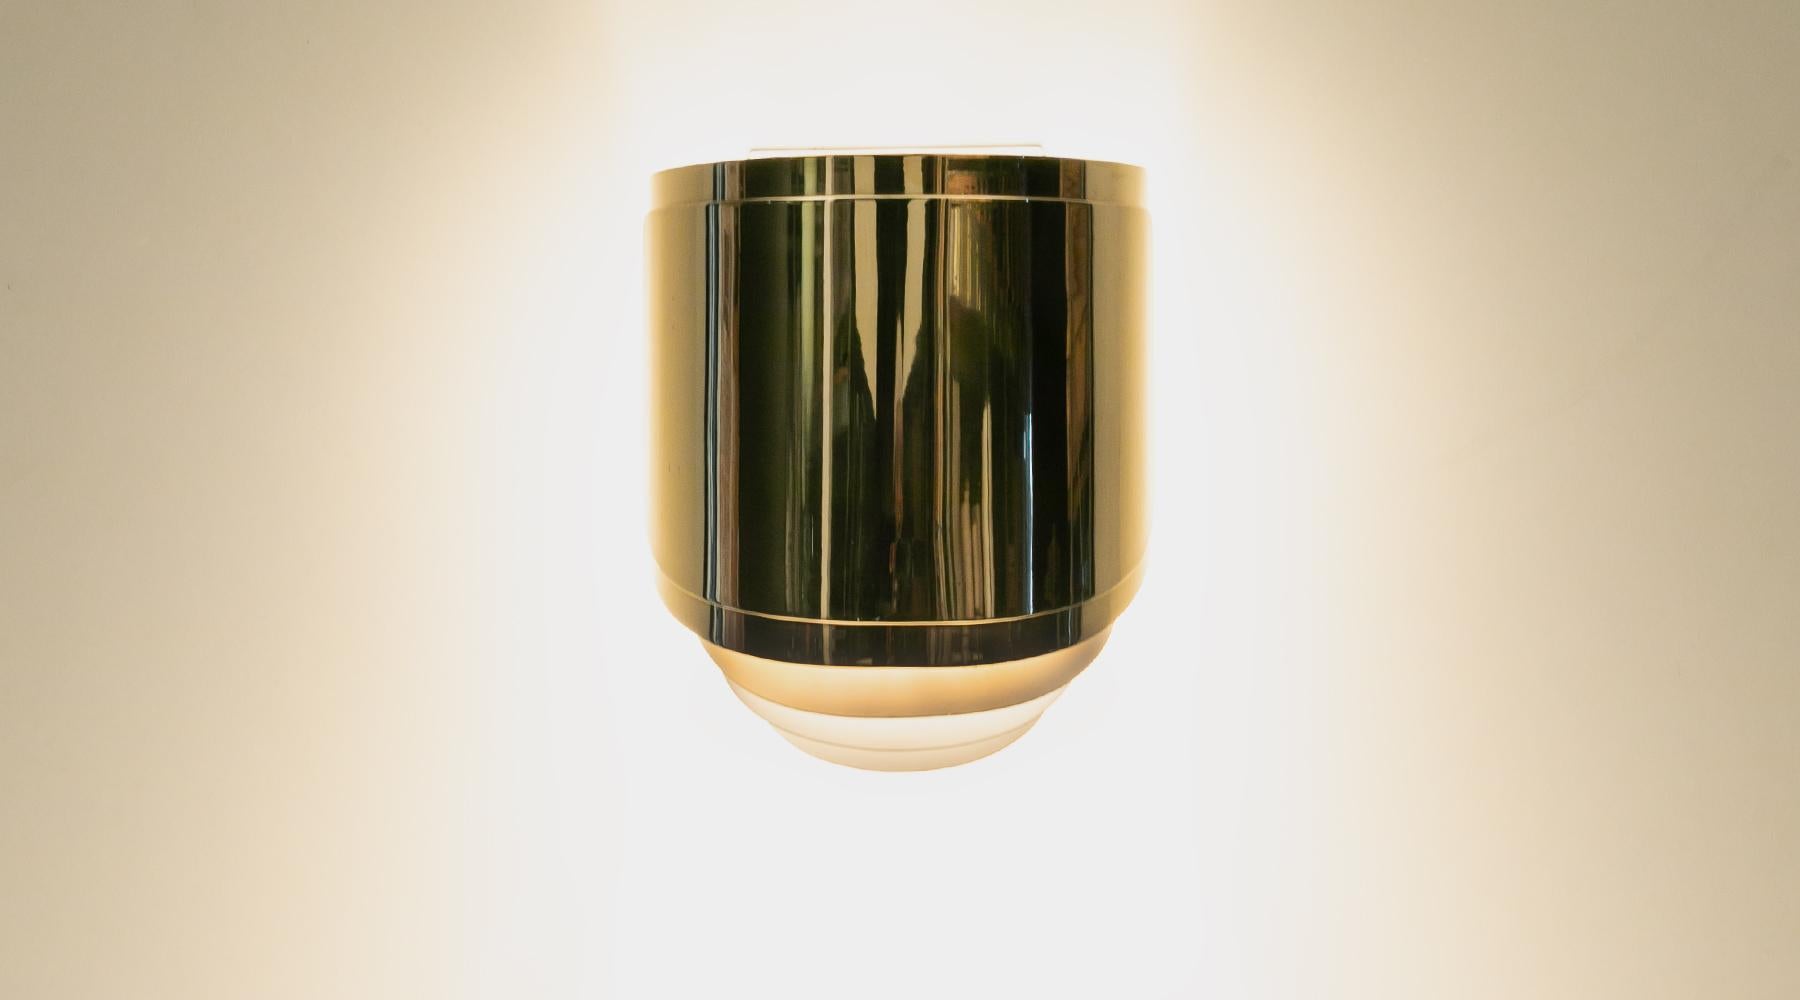 A single 1980s American polished brass wall light designed by Warren Platner. 

Brass wall-mounted lamps designed and manufactured Warren Platner in USA in 1981. The sconce gives a beautiful light and shadow play on the wall when lighted. Brass